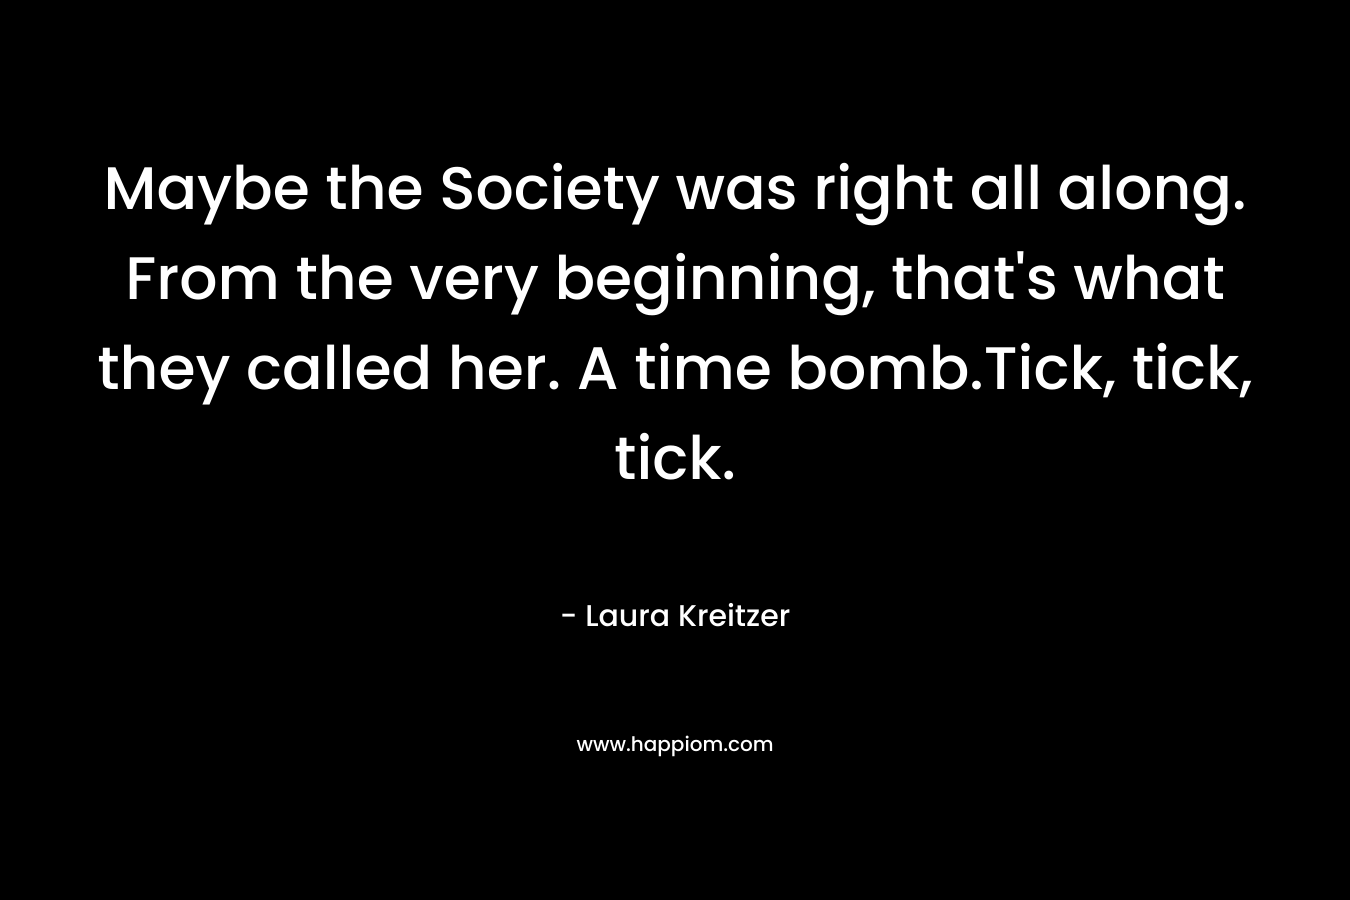 Maybe the Society was right all along. From the very beginning, that’s what they called her. A time bomb.Tick, tick, tick. – Laura Kreitzer